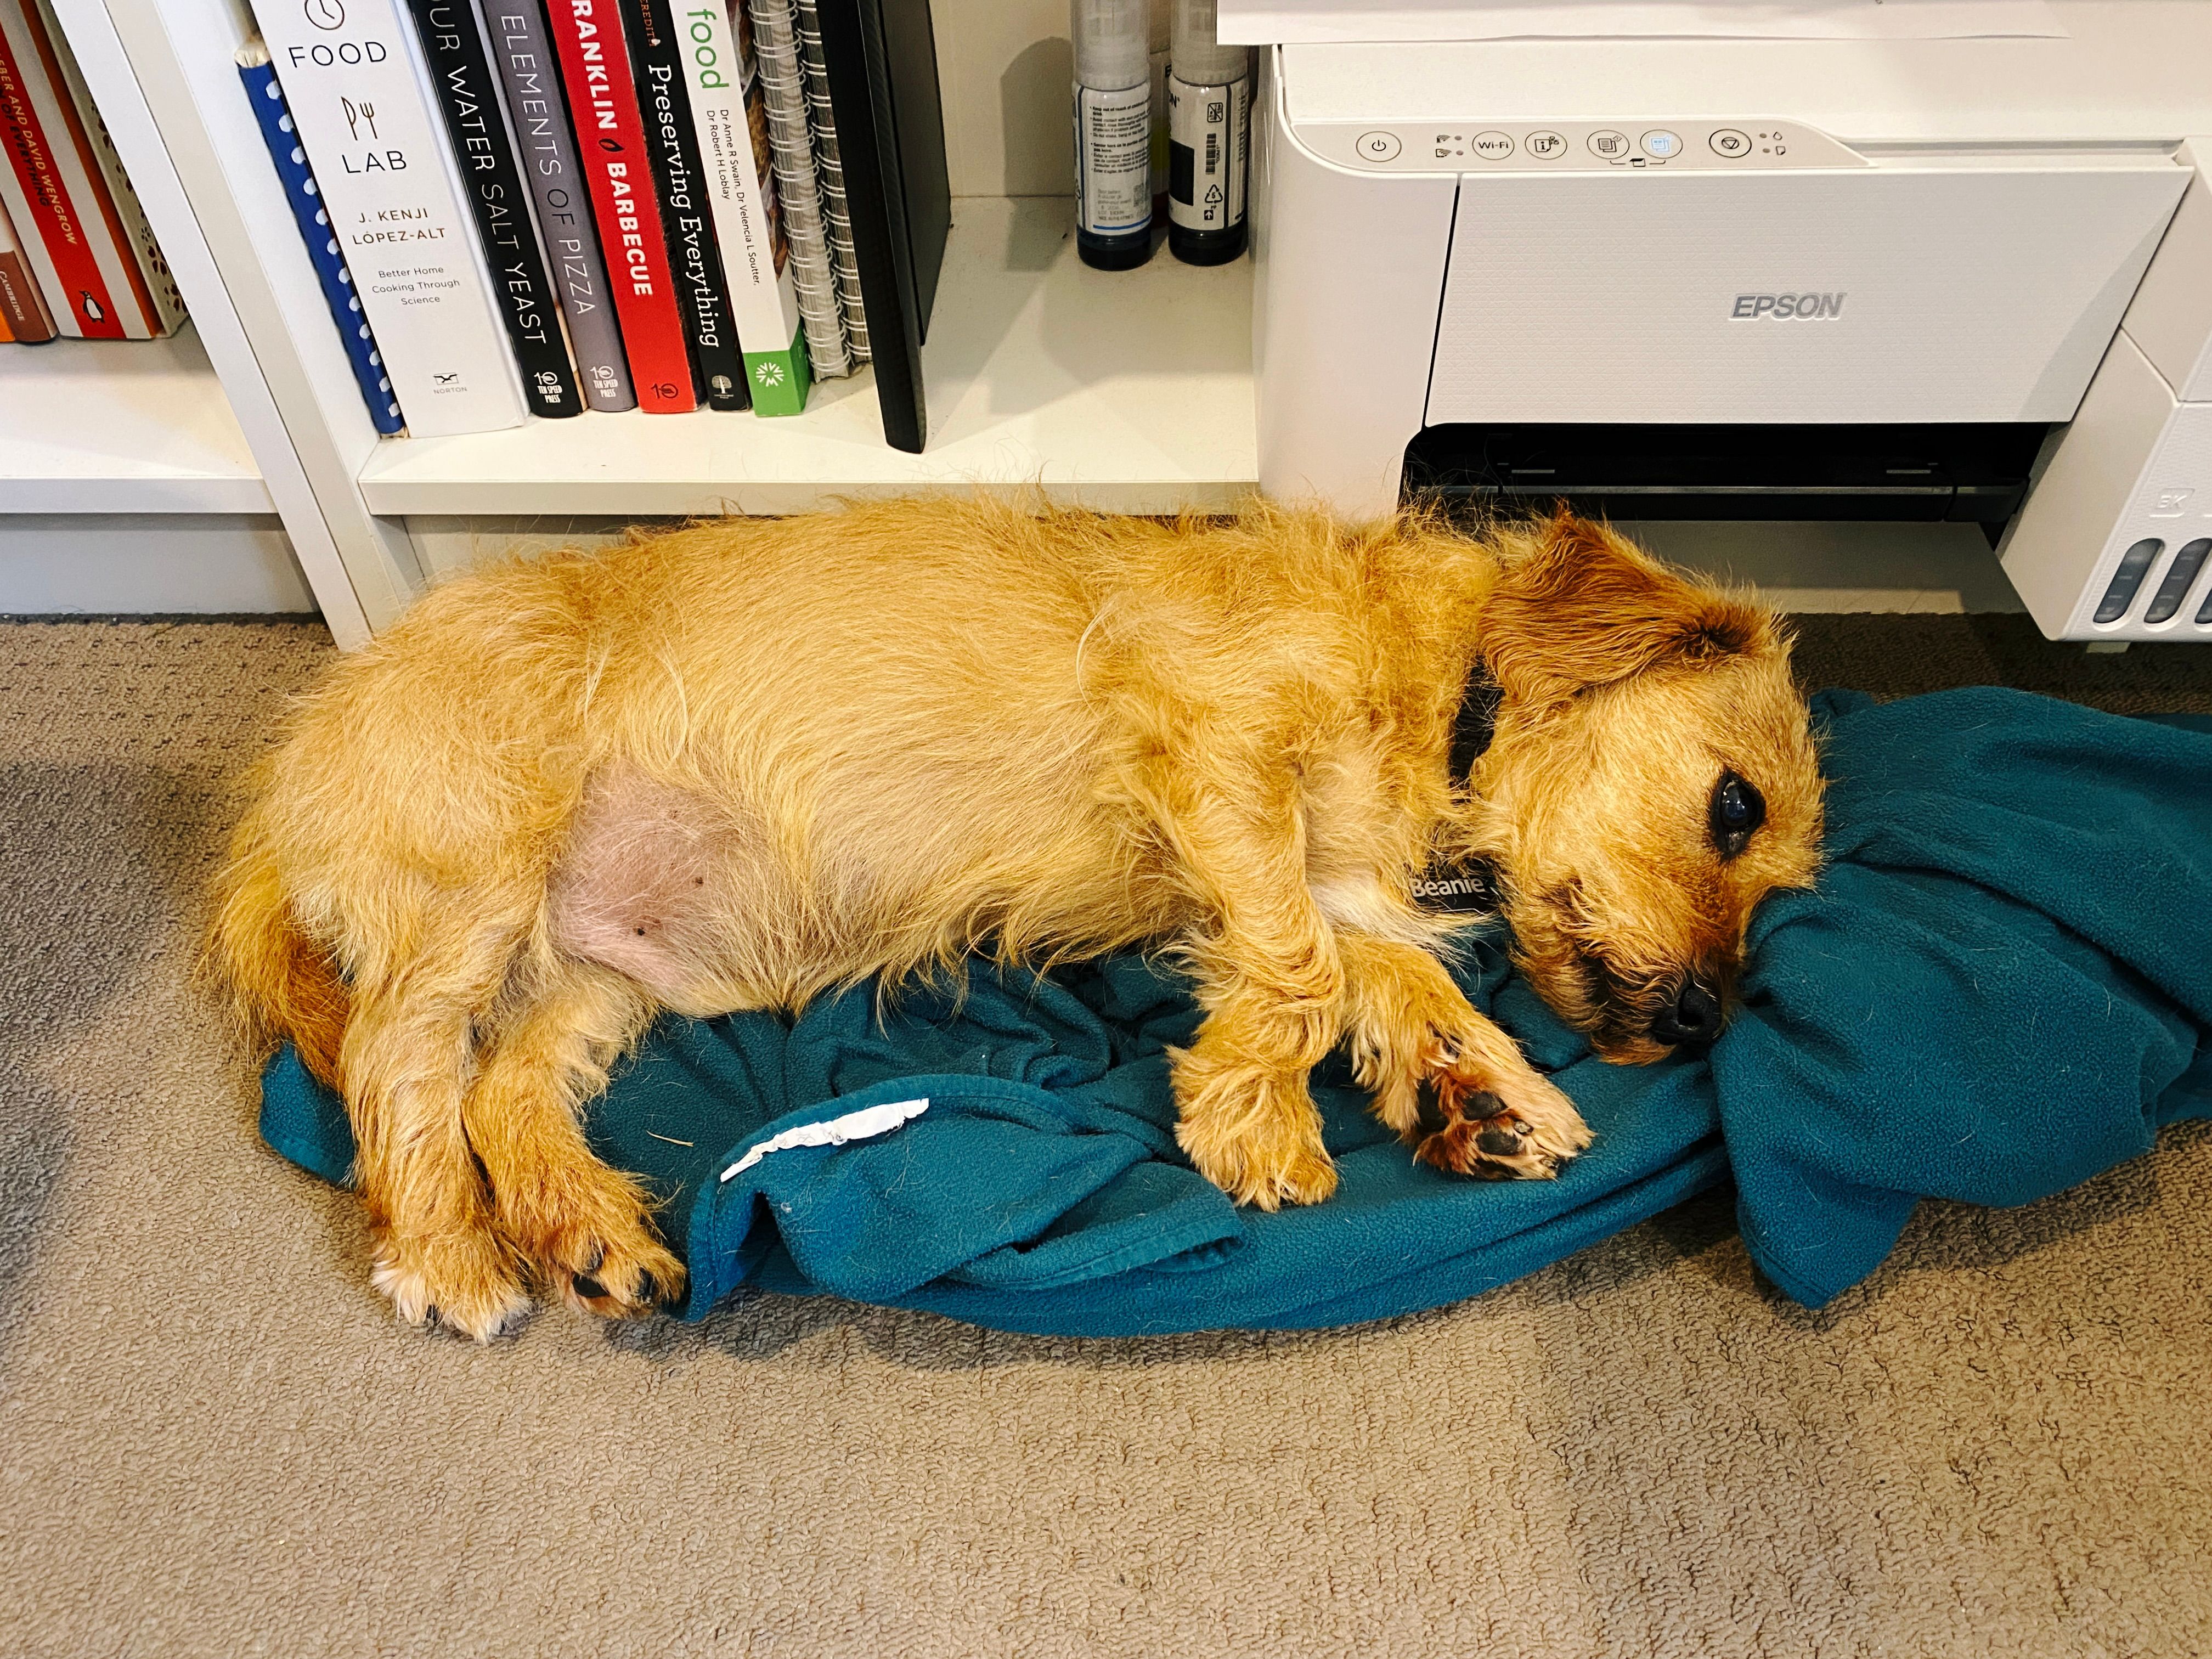 A photo of a small scruffy blonde dog lying on his side on a green blanket, which is hard against a bookshelf that has a printer and various books on it.